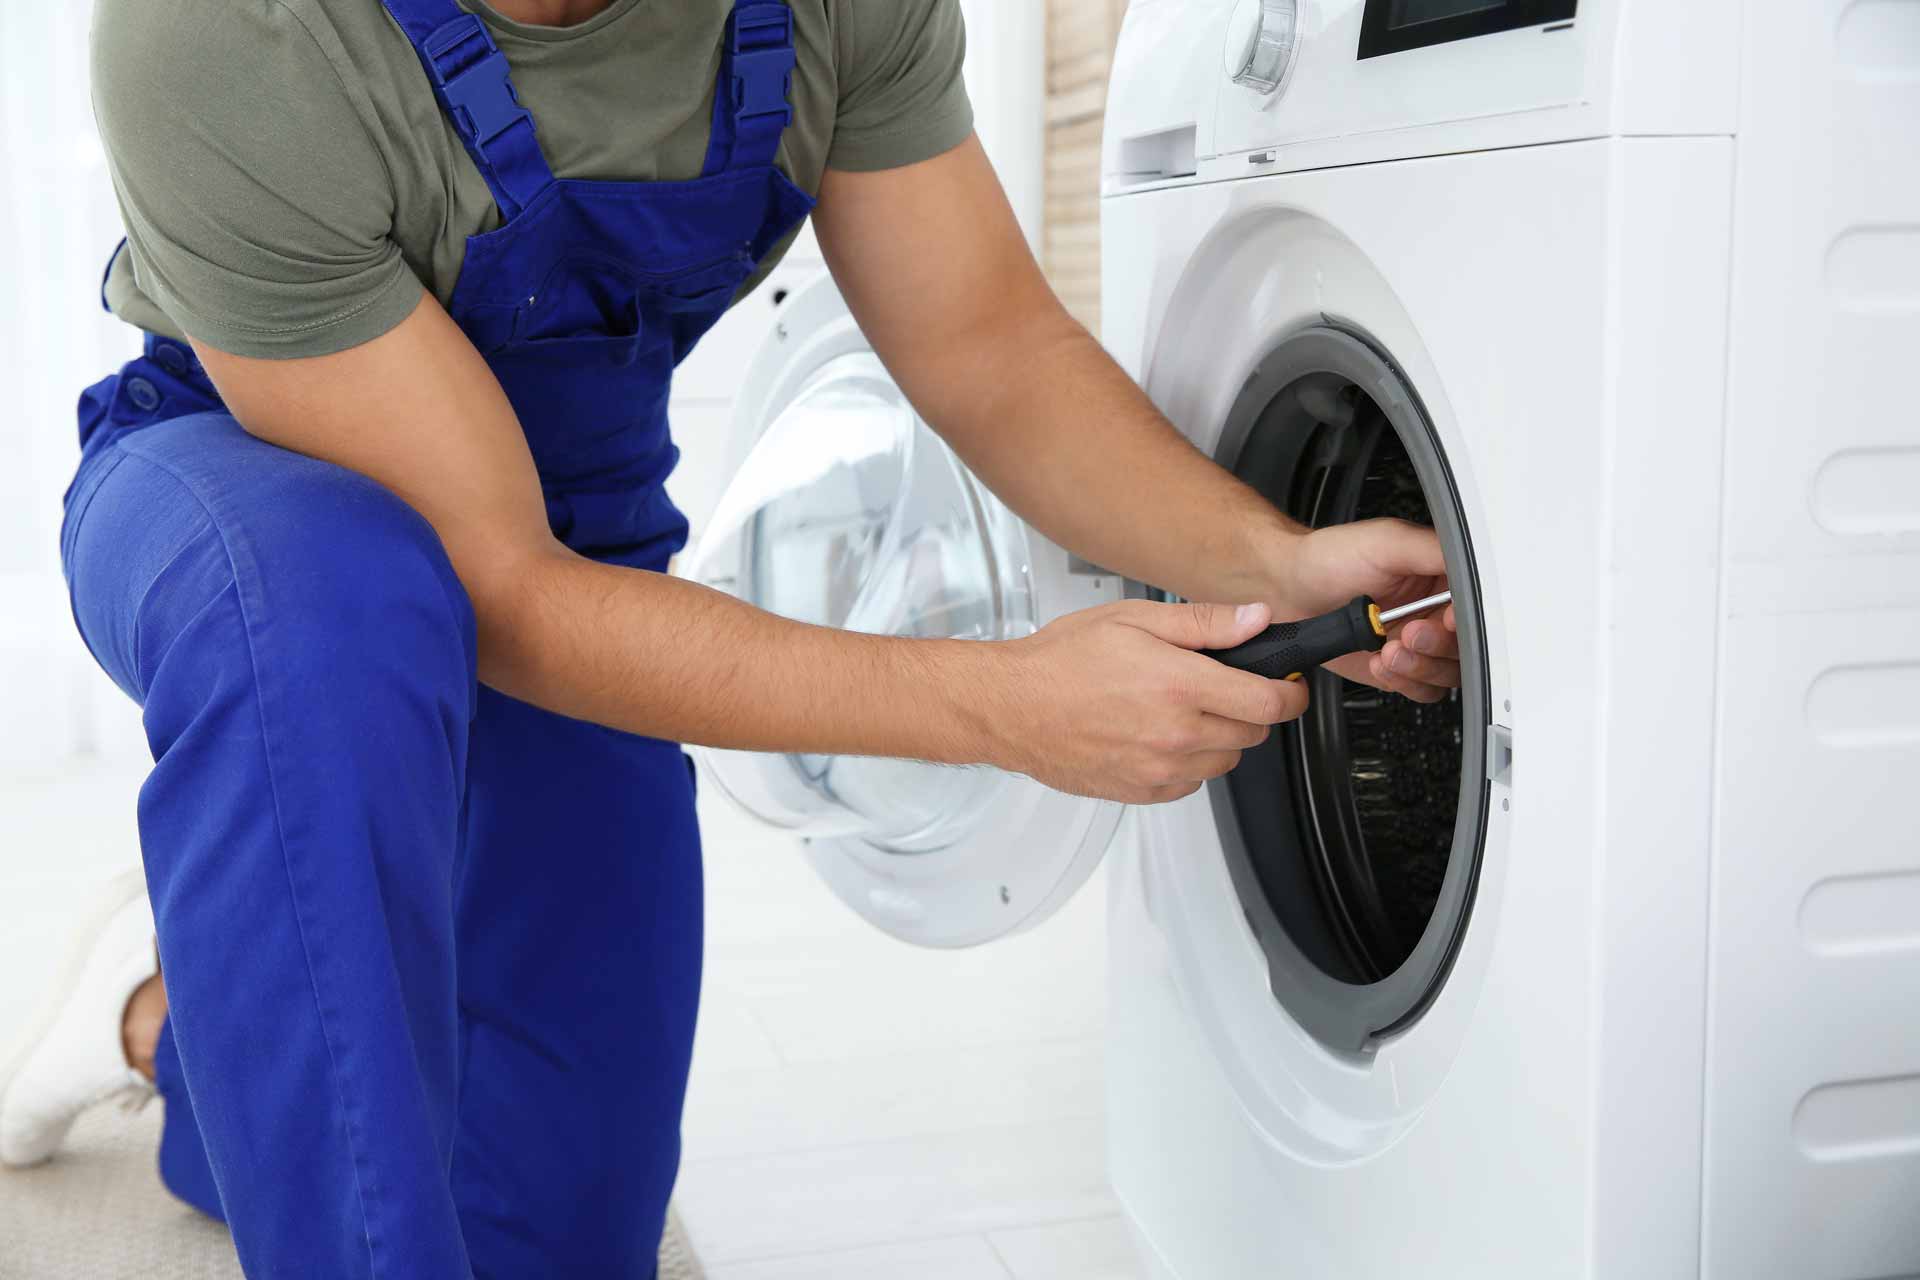 Technician in blue overalls repairs a washing machine